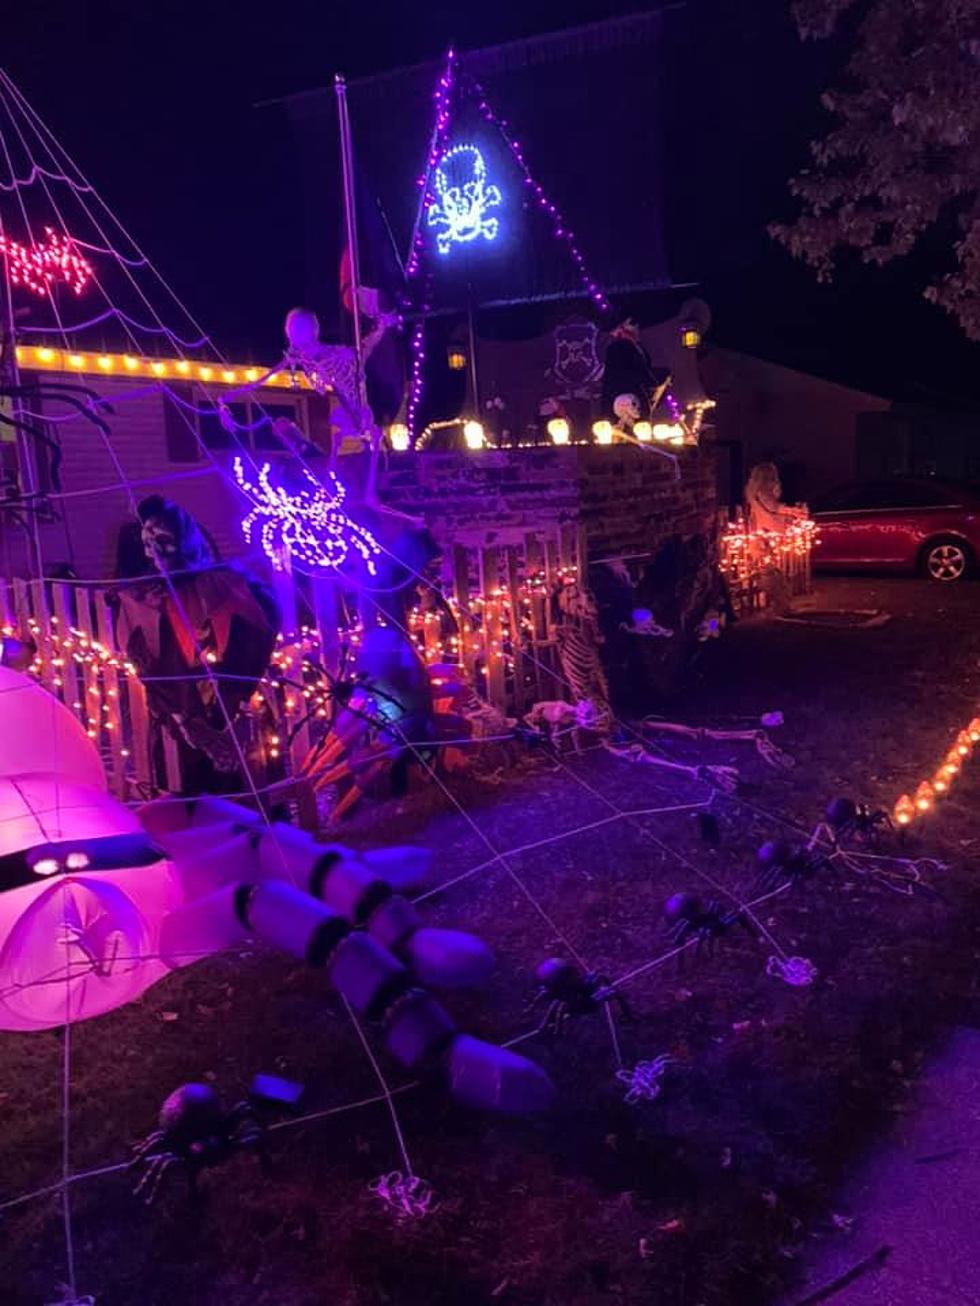 Check Out This Epic St. Cloud Halloween Lights Display!